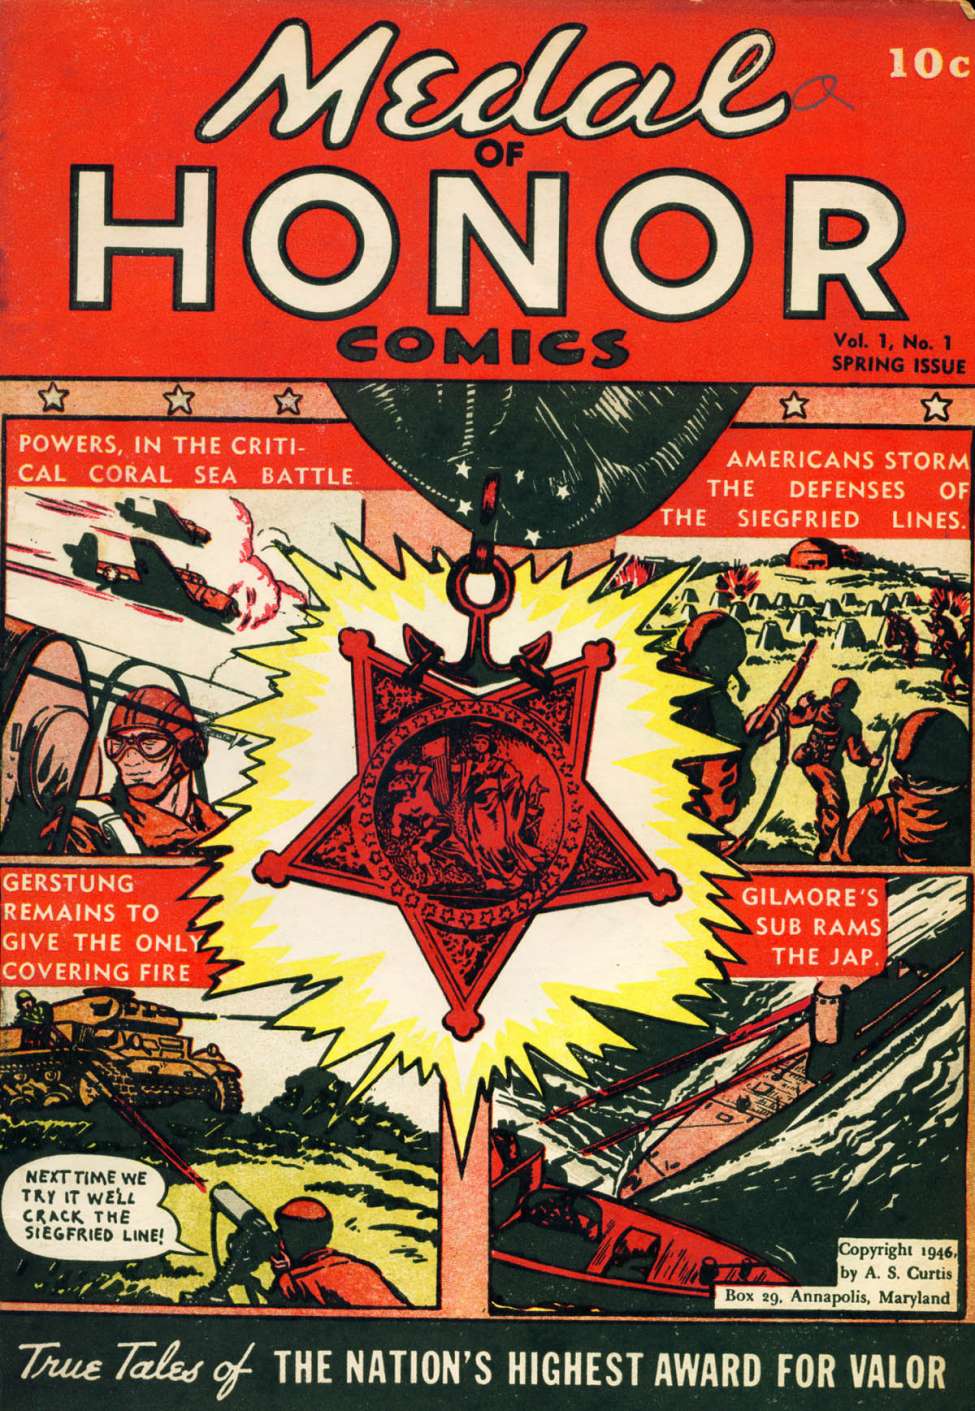 Book Cover For Medal of Honor Comics 1 (Fiche)